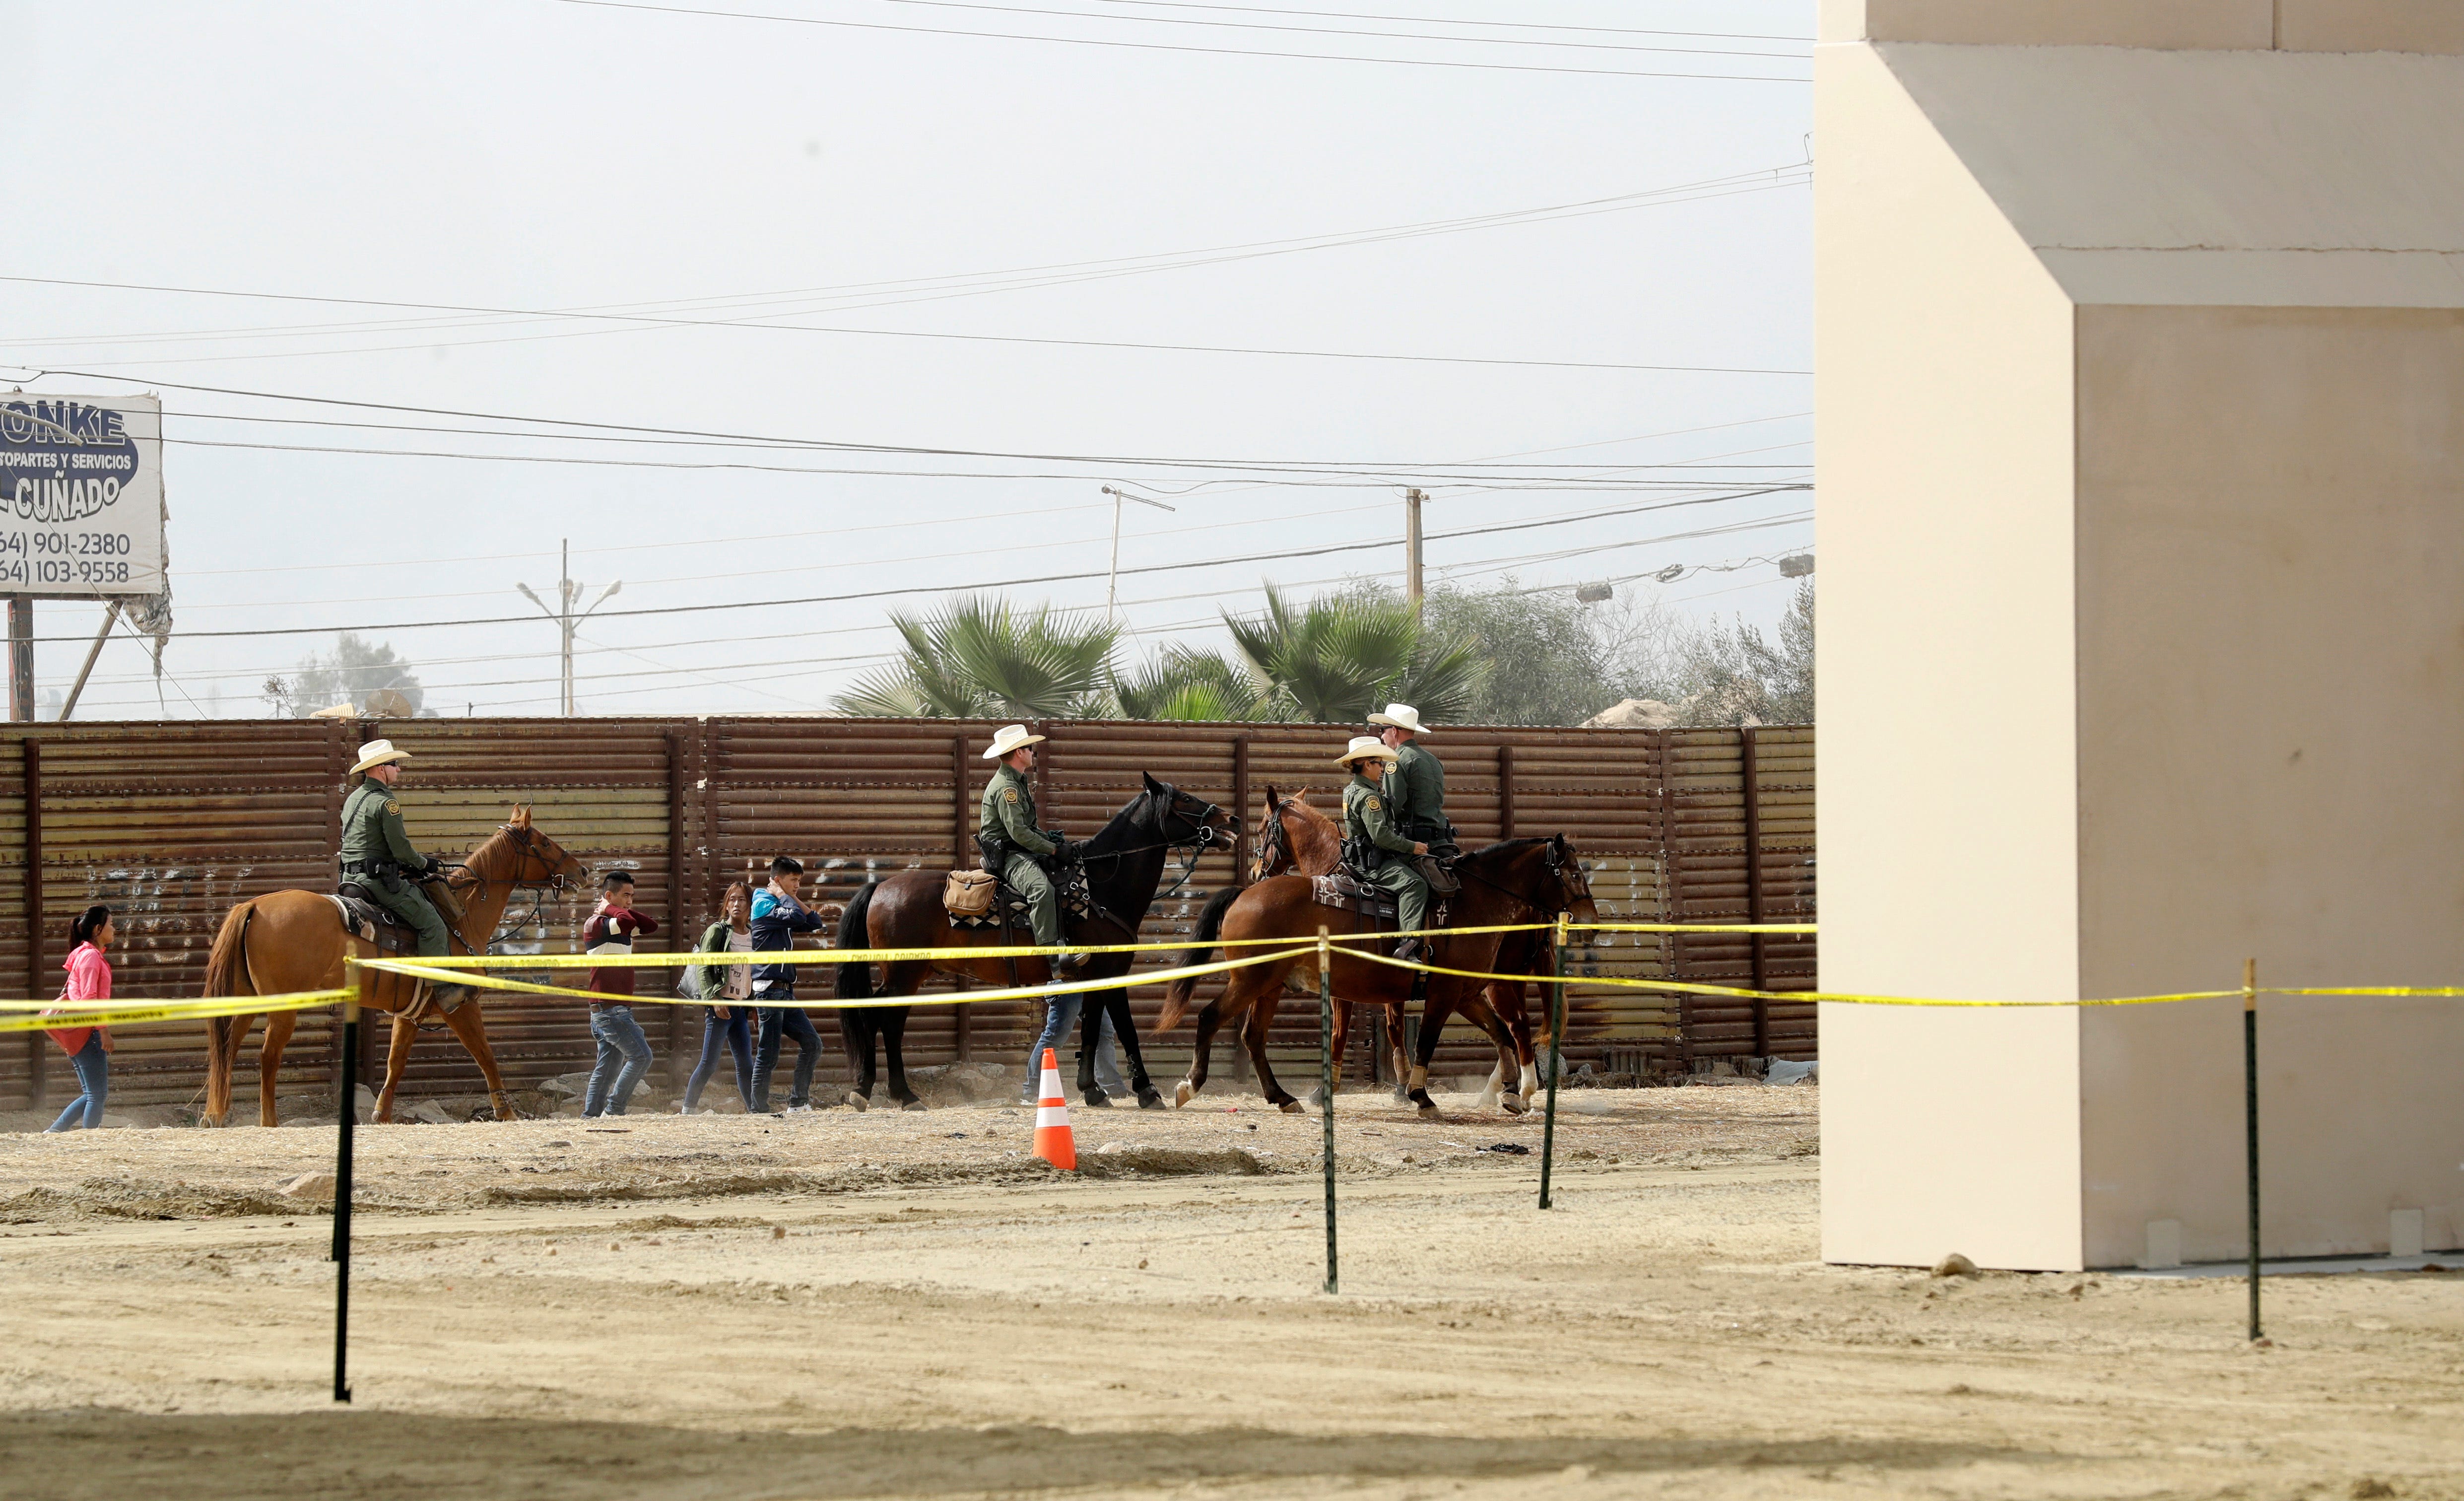 In this Oct. 19, 2017, file photo, a group of people are detained by Border Patrol agents on horseback after crossing the border illegally from Tijuana, Mexico, near where prototypes for a border wall, right, were being constructed in San Diego. More than 1,600 people arrested at the U.S.-Mexico border, including parents who have been separated from their children, are being transferred to federal prisons, U.S. immigration authorities confirmed Thursday, June 7, 2018. They said they’re running out of room at their own facilities amid President Donald Trump’s crackdown on illegal immigration. The move drew condemnation from activists who said the detainees may have legitimate claims to asylum and don’t deserve to be held in federal prisons. (AP Photo/Gregory Bull, File)